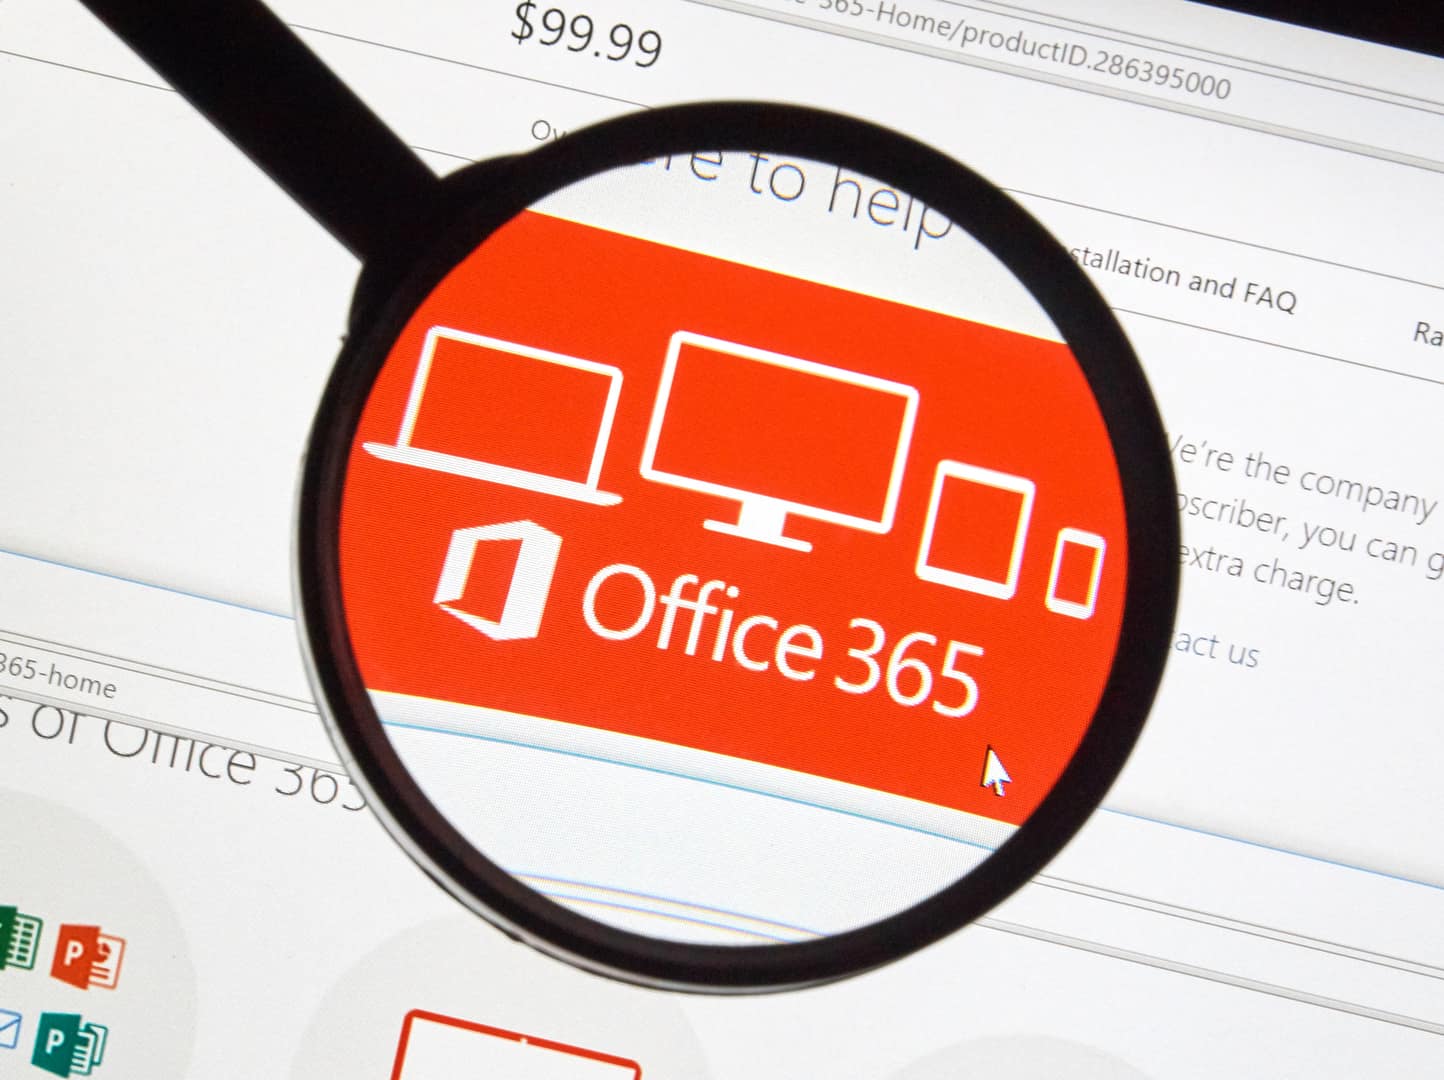 Protek Can Help With Your Office 365 Migration